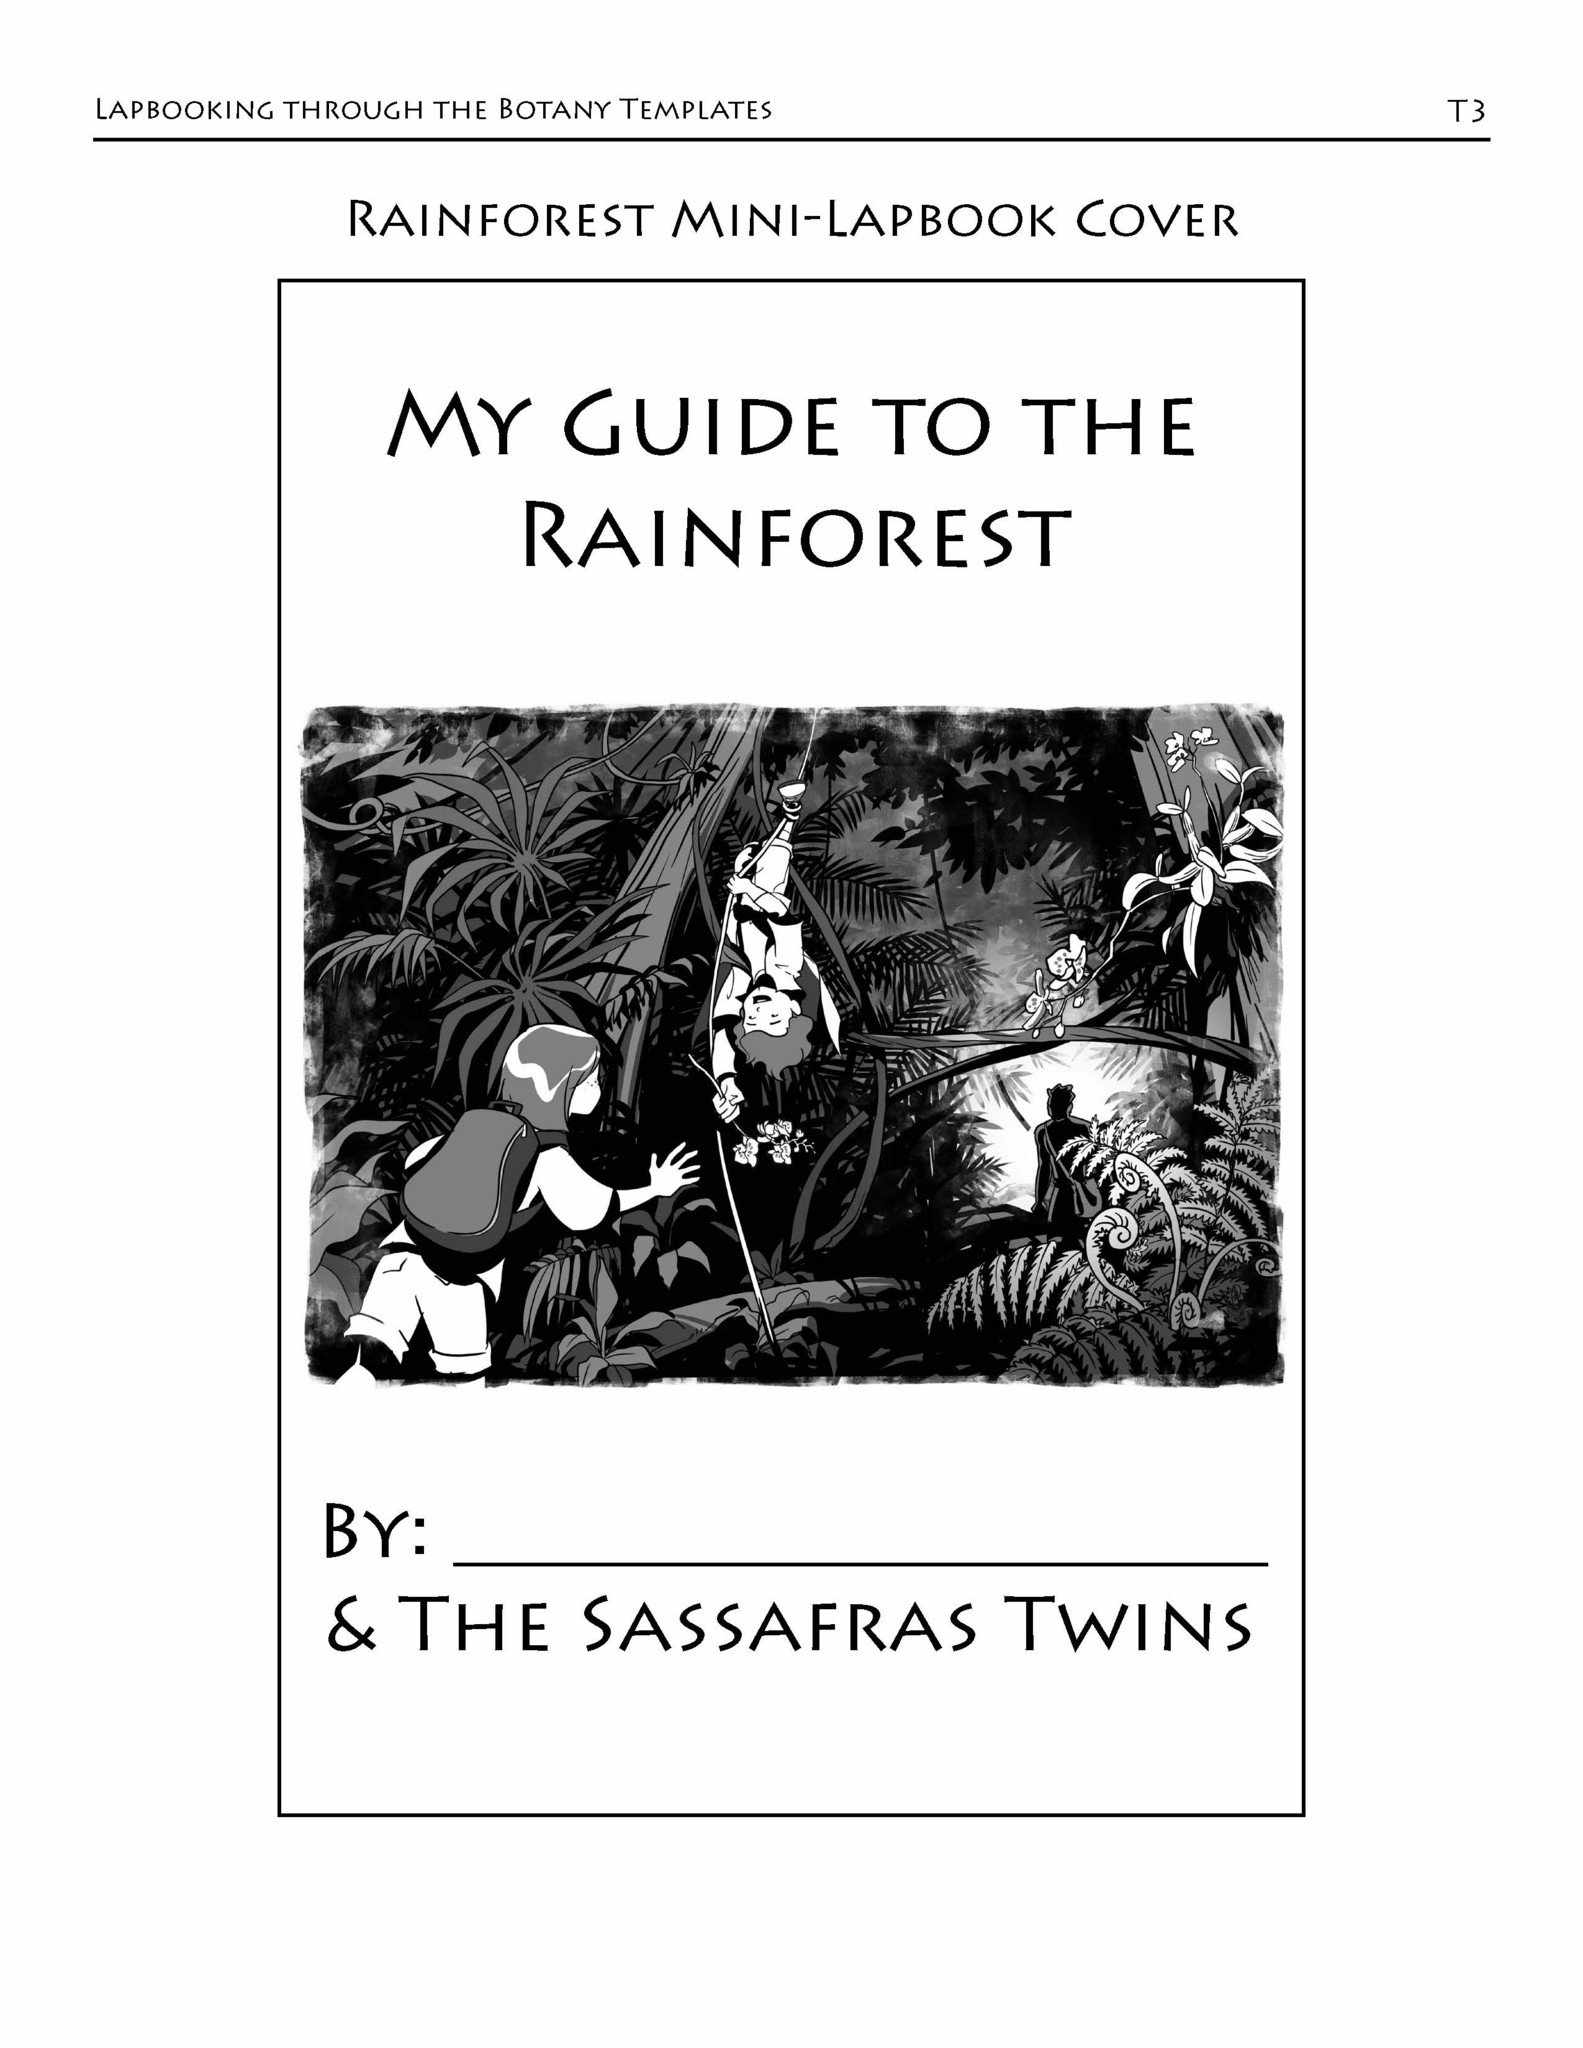 Living Books - Lapbooking Through Botany With The Sassafras Twins (eBook)